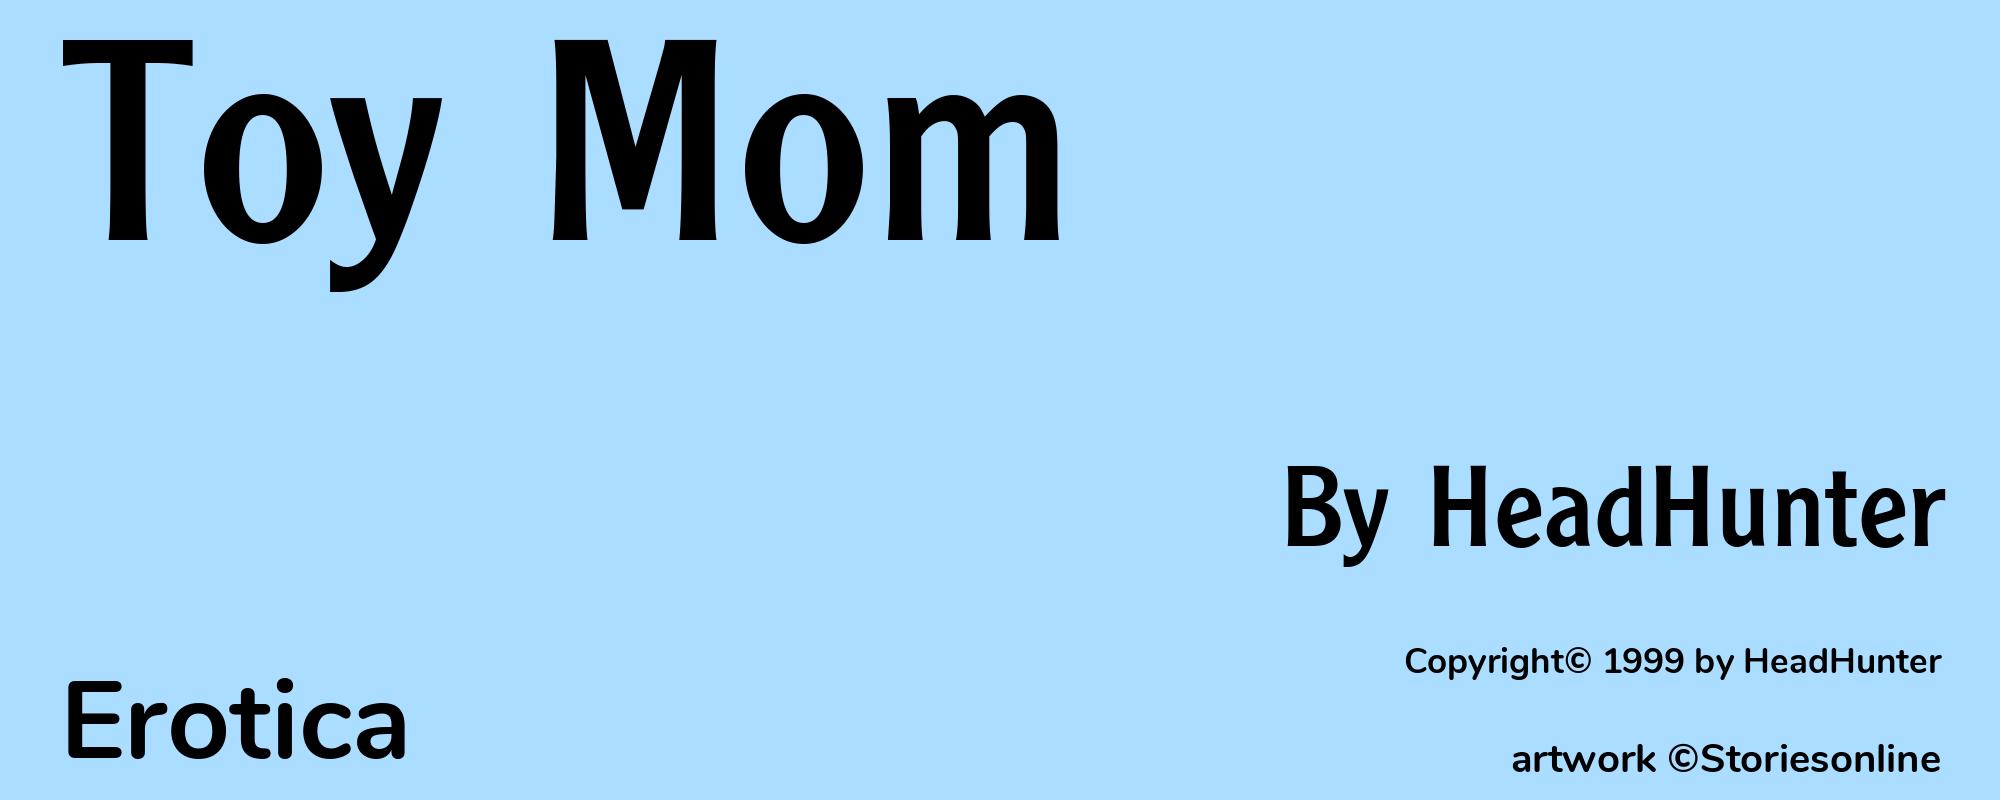 Toy Mom - Cover